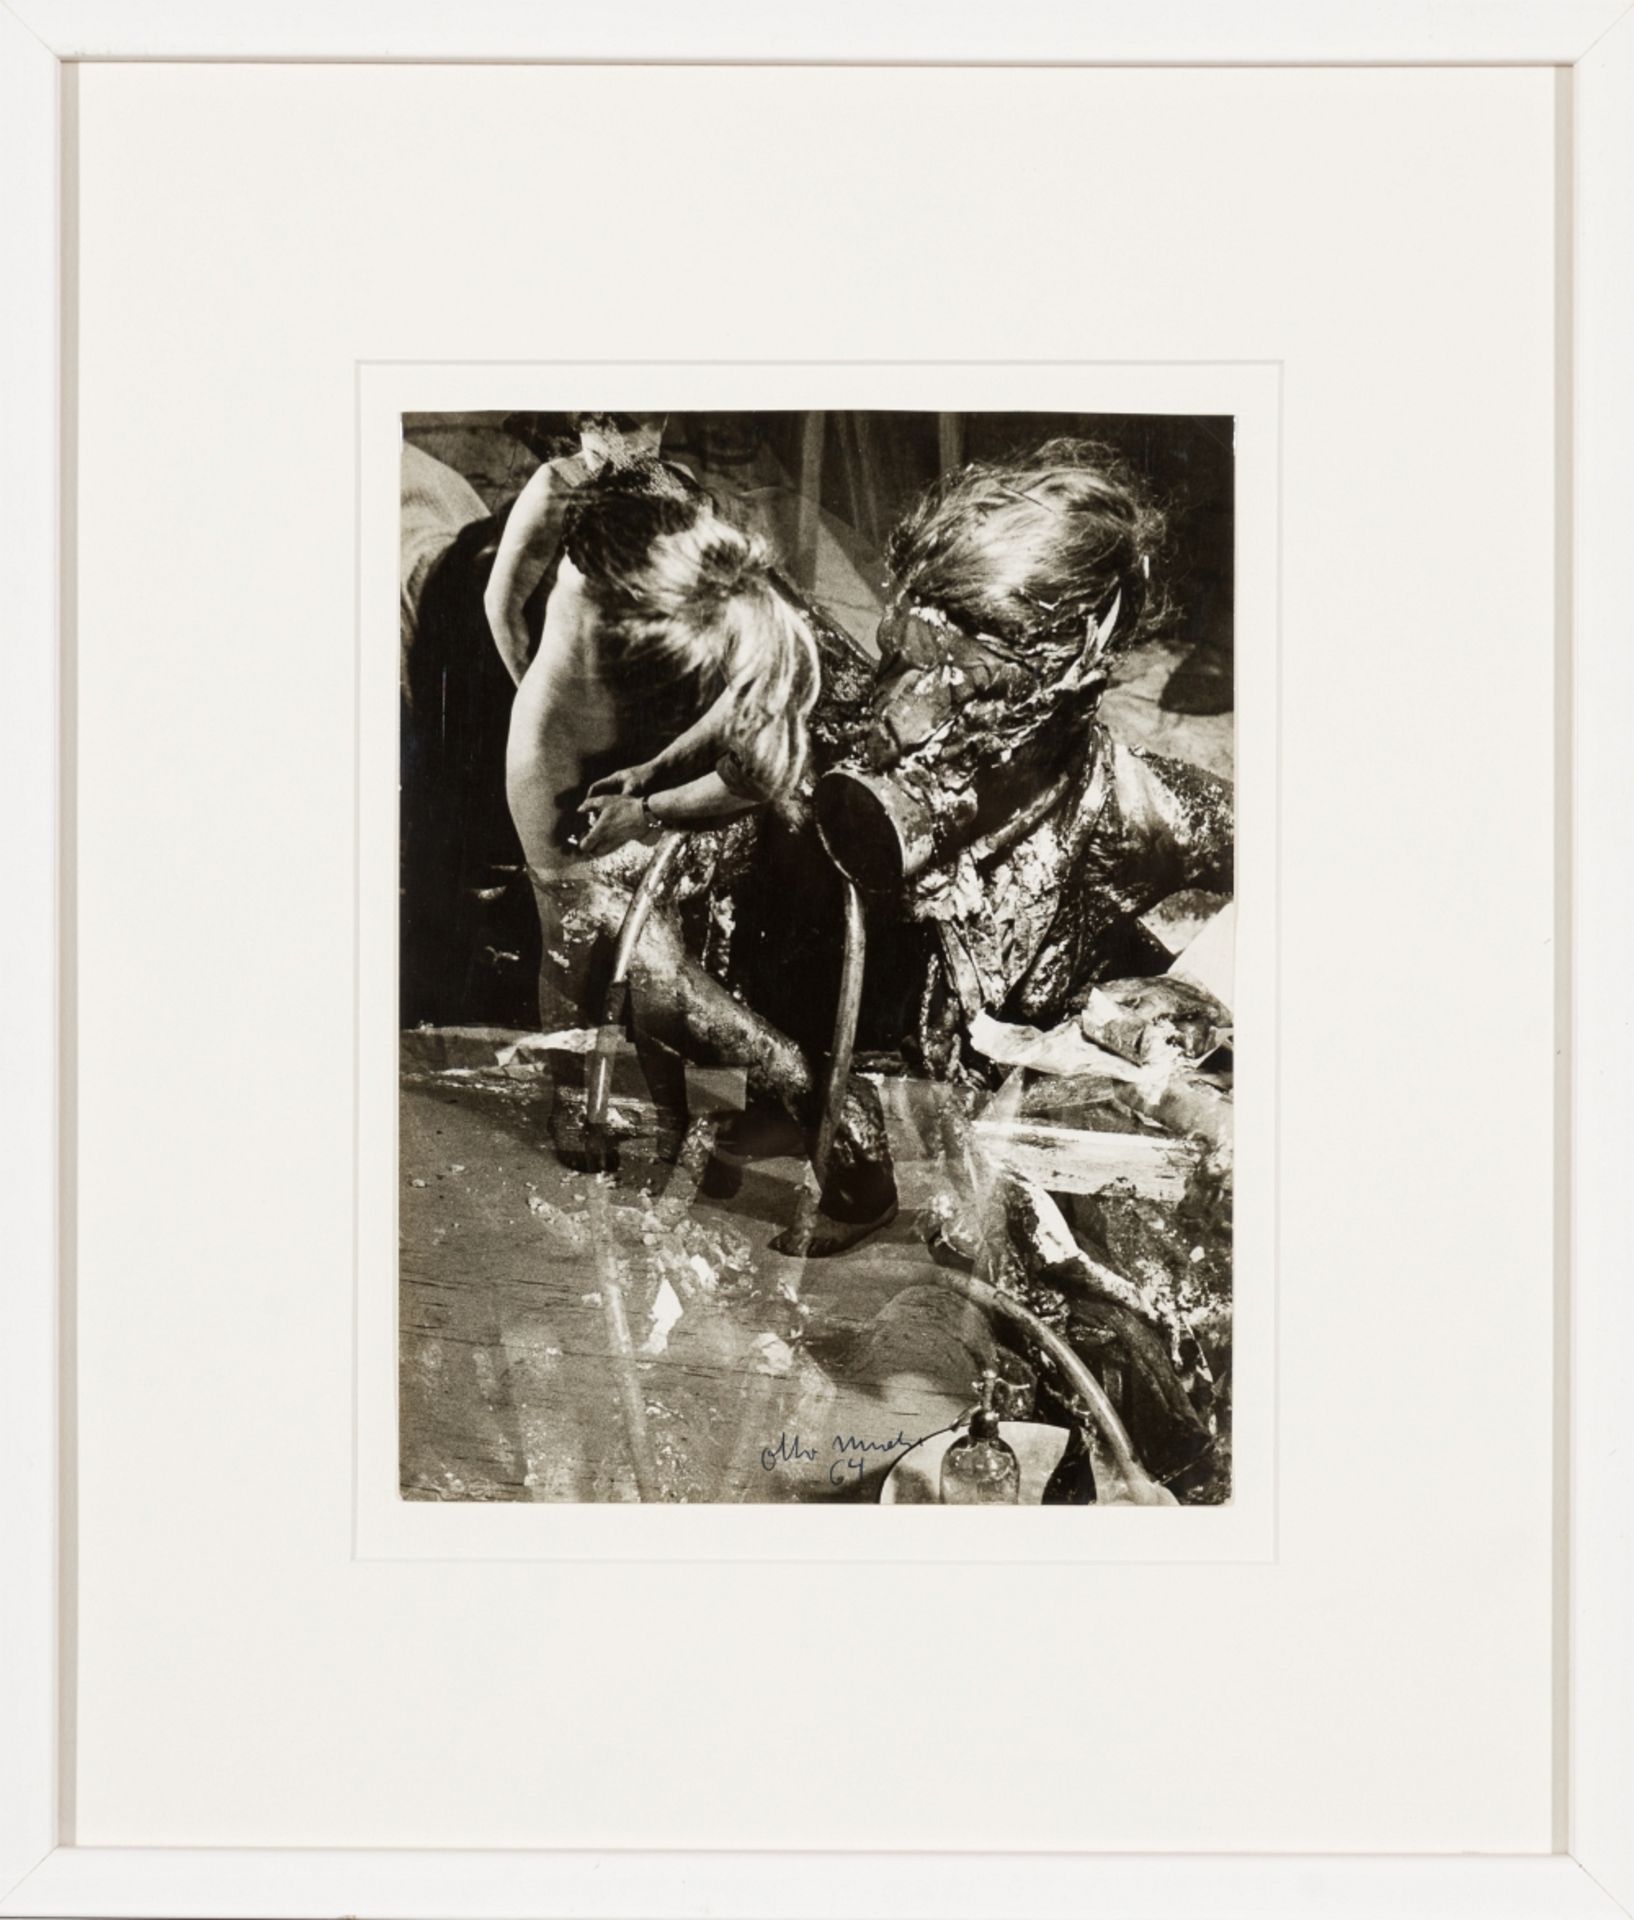 Mühl, Otto (1925 - 2013) Untitled, (19)64 Silver Gelatin Print Signed lower Center 9,3 x 7 in framed - Image 2 of 5